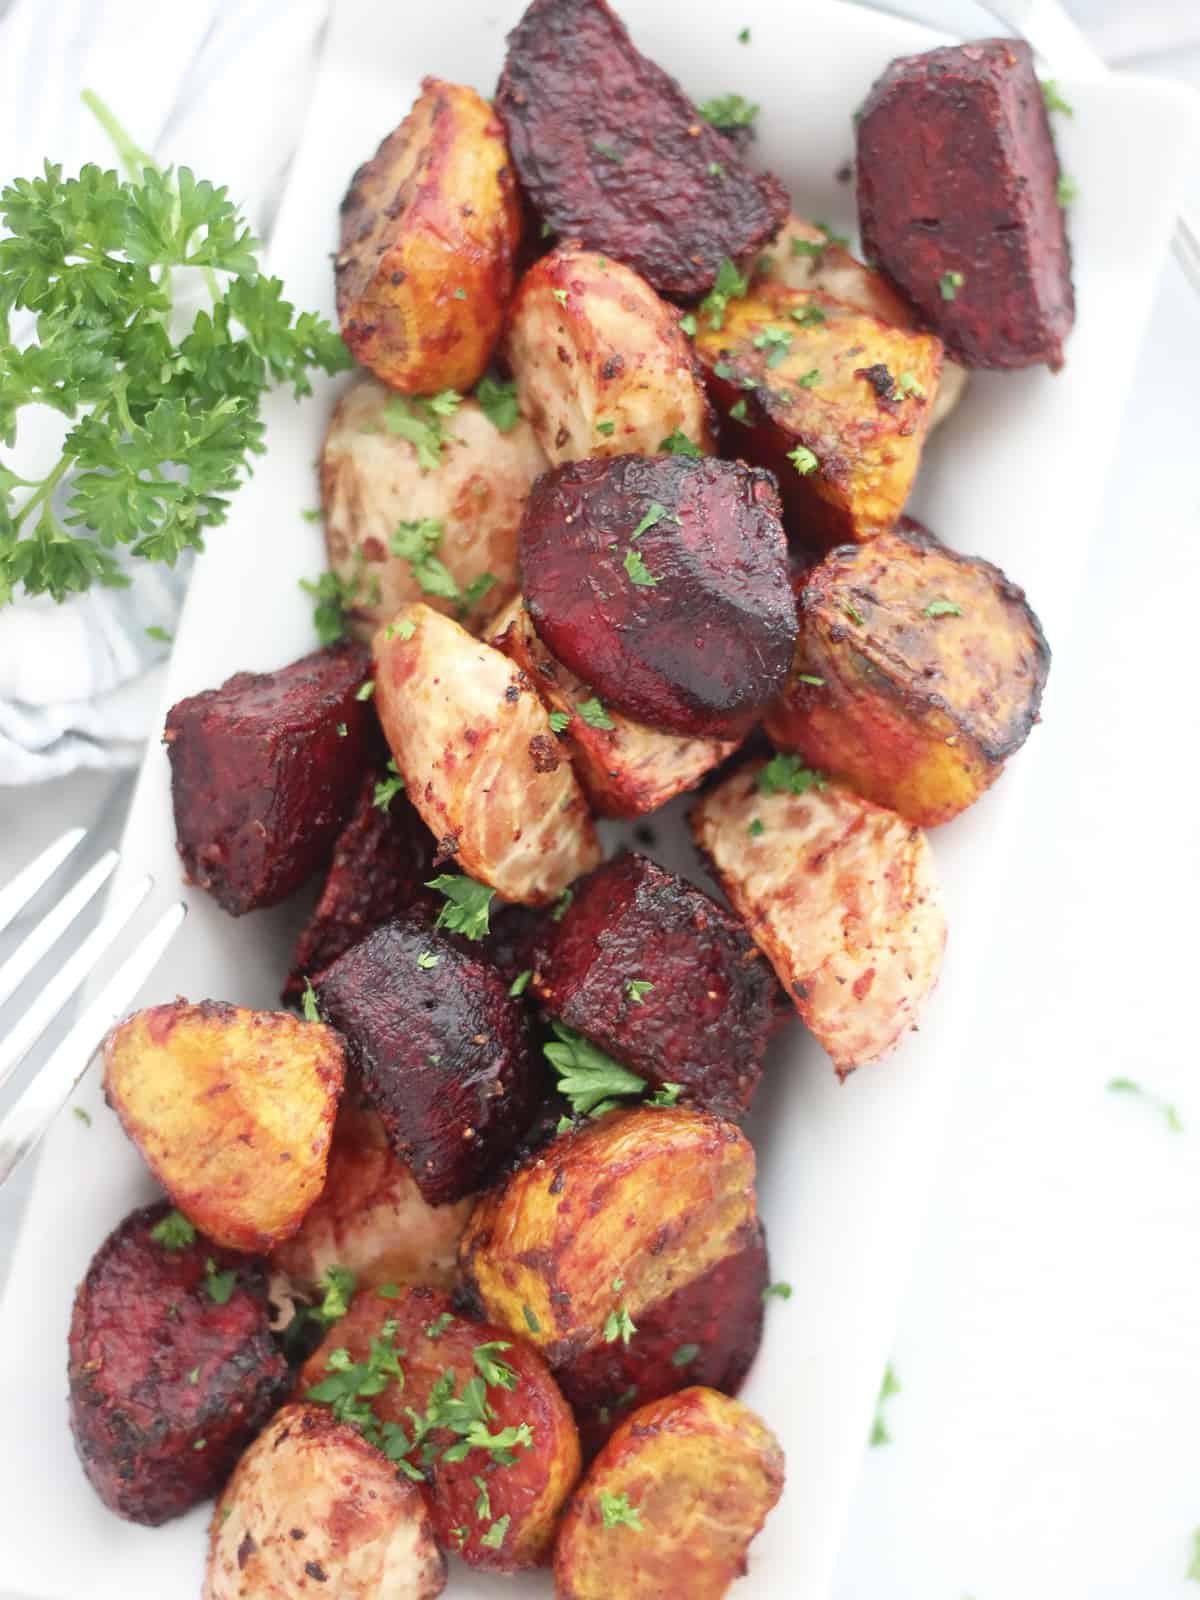 Overhead shot of air fryer roasted beetroots on a white plate with fresh parsley garnish.